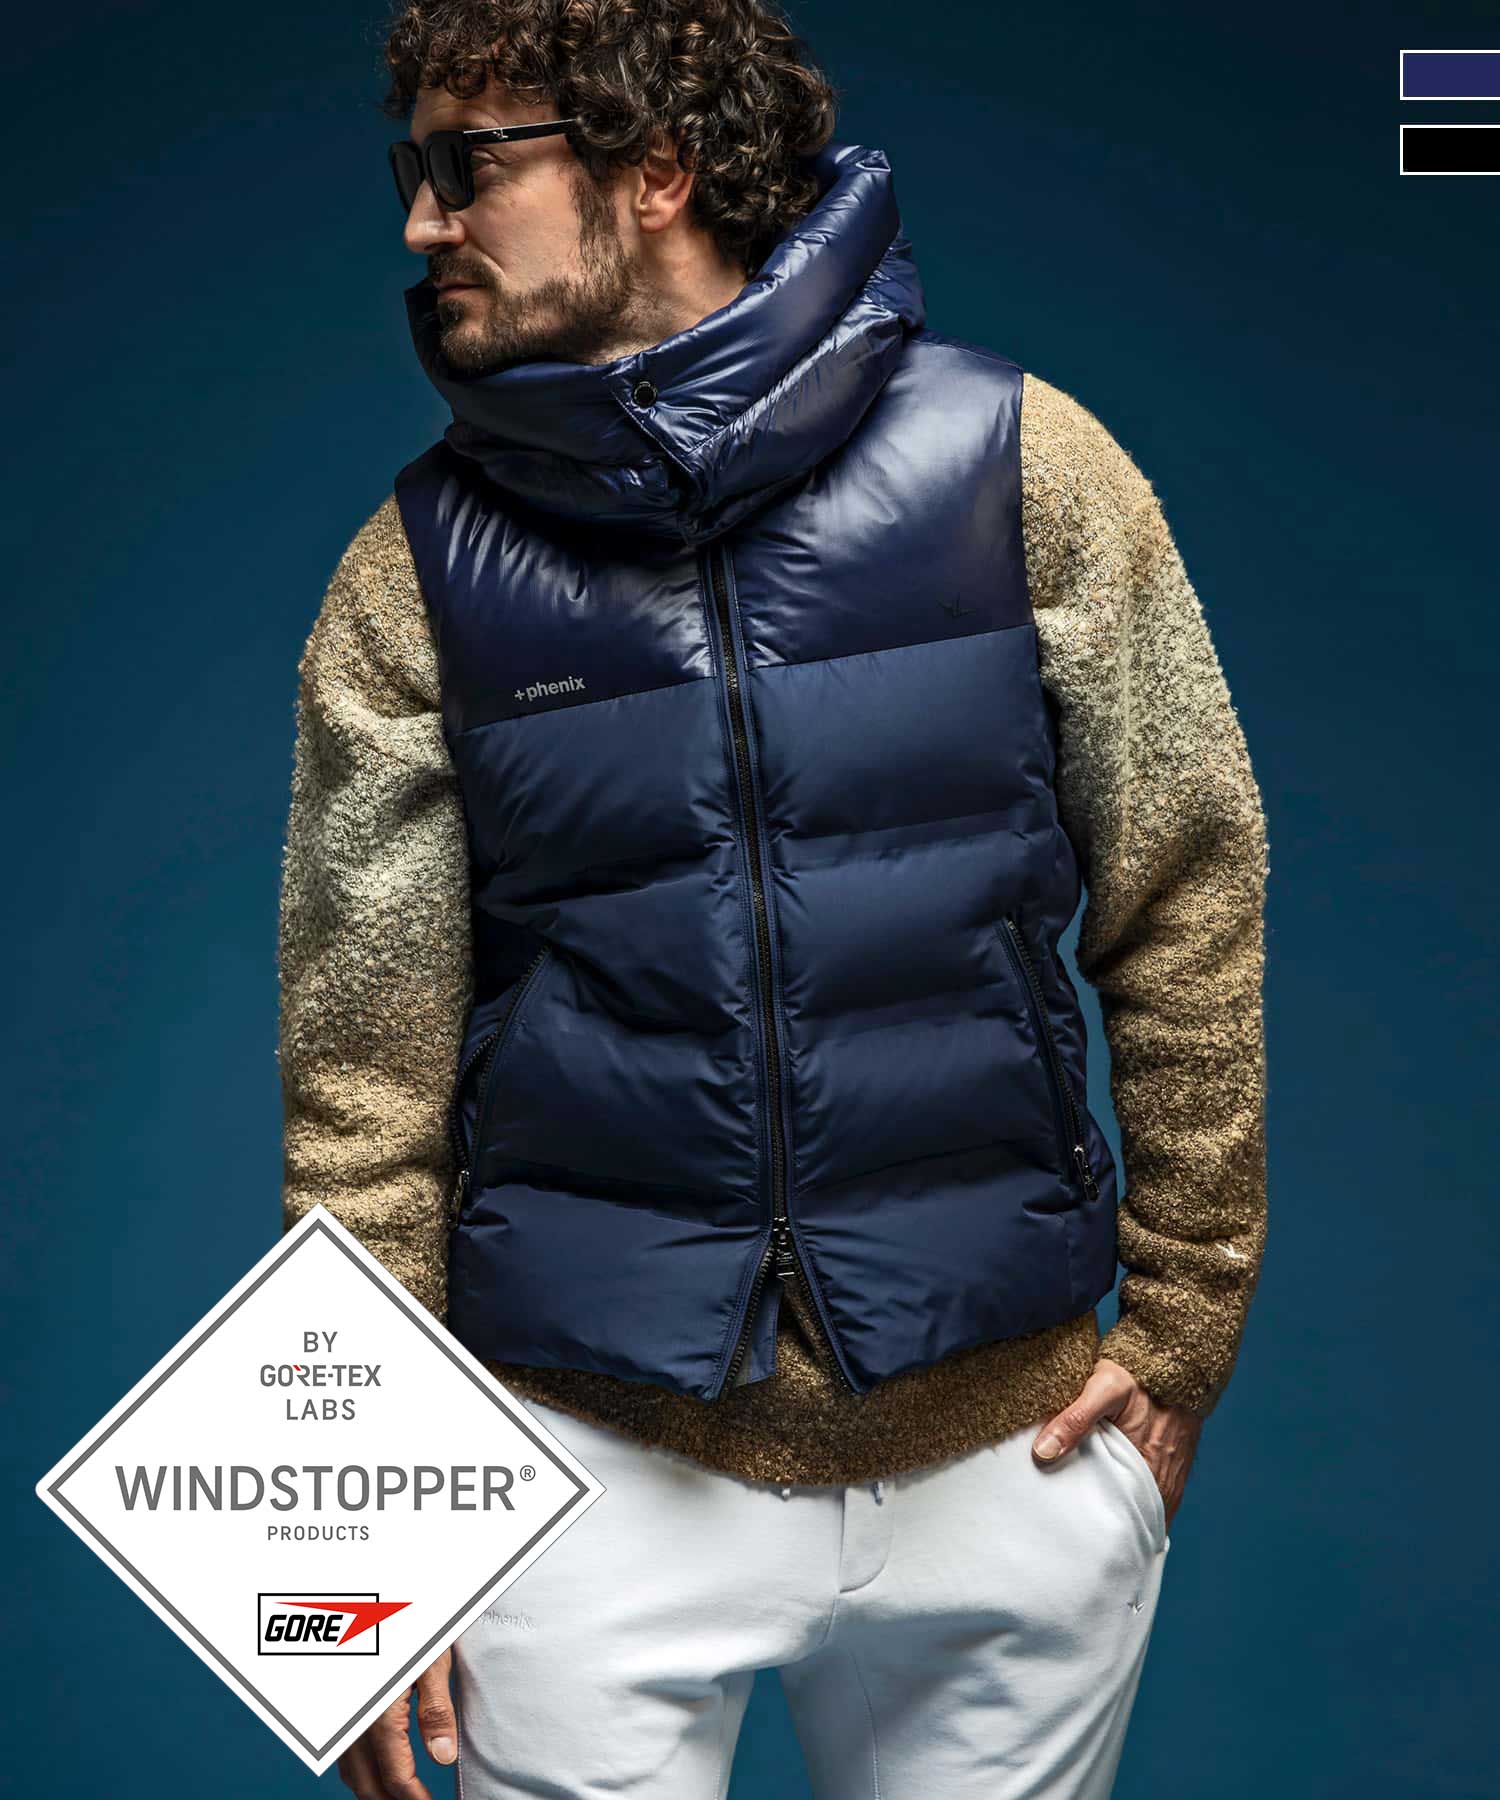 MENS】コンビダウンベスト WINDSTOPPER(R) プロダクト by GORE-TEX ...